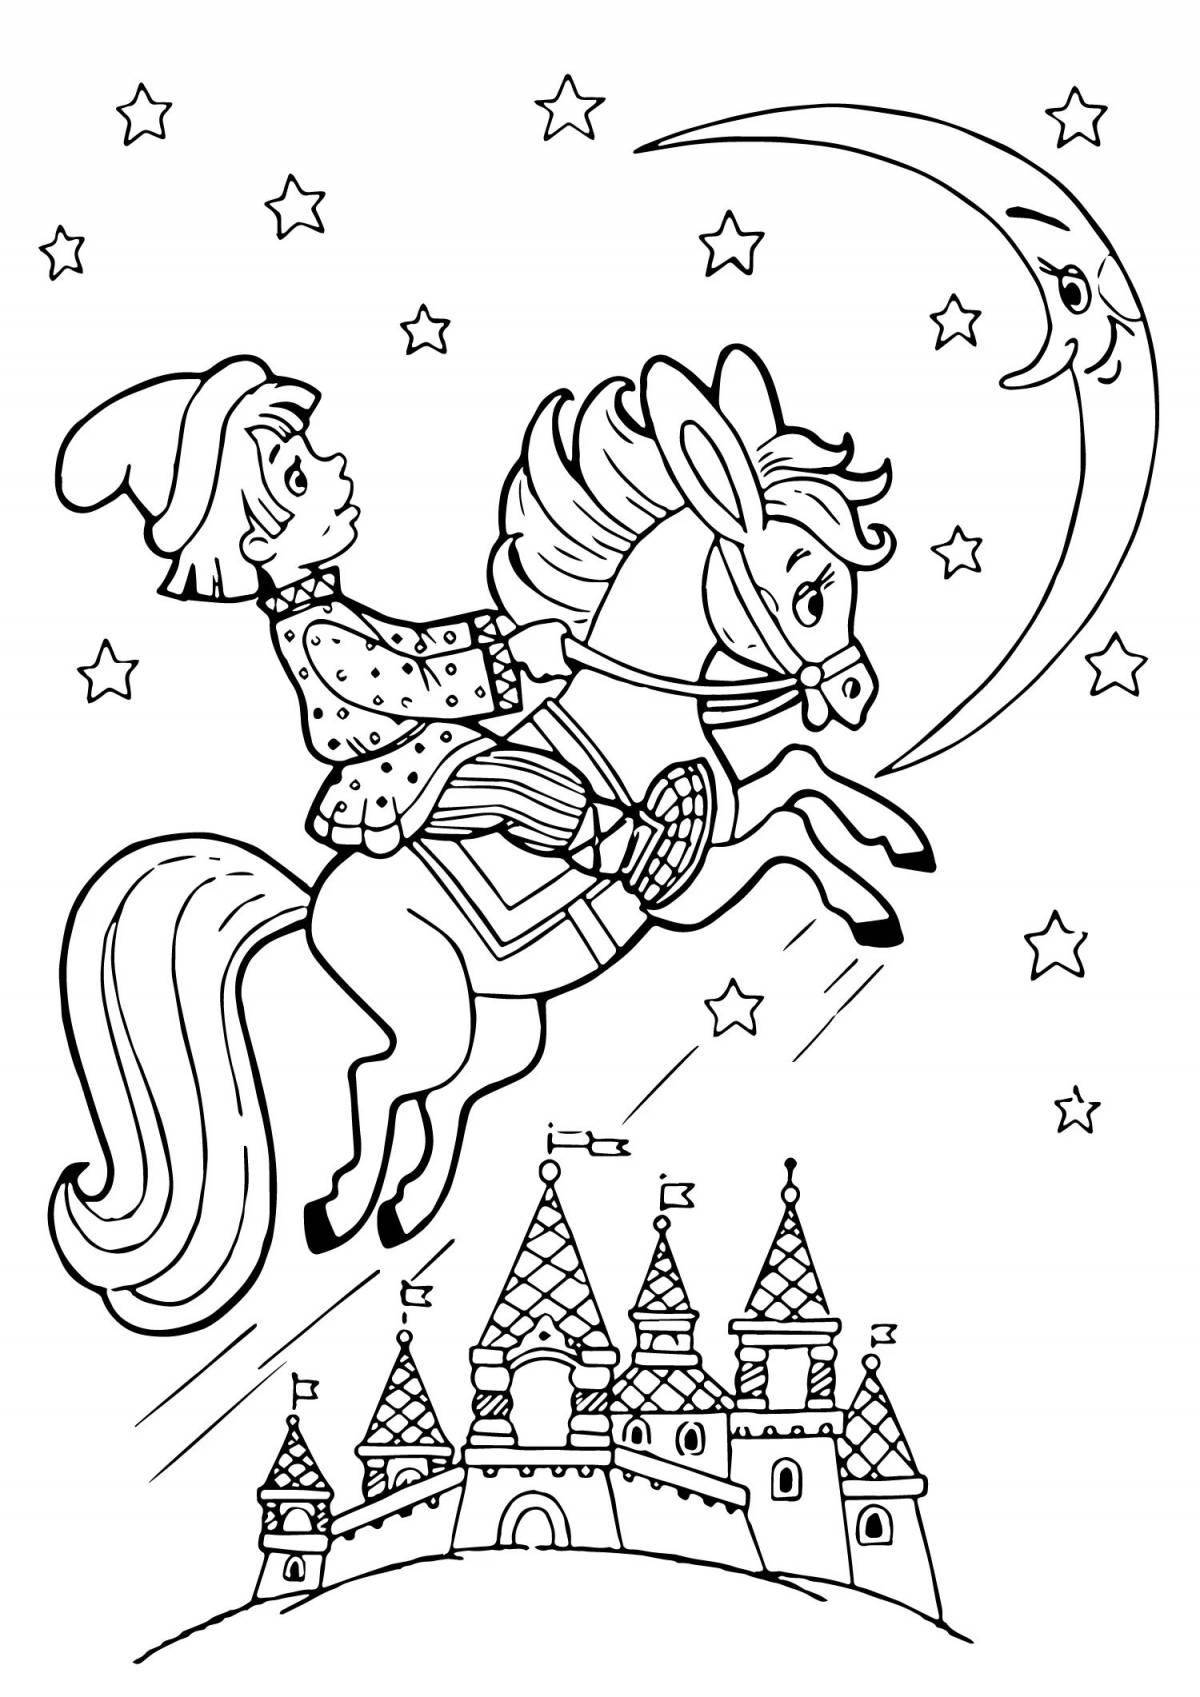 Humpbacked Horse coloring book